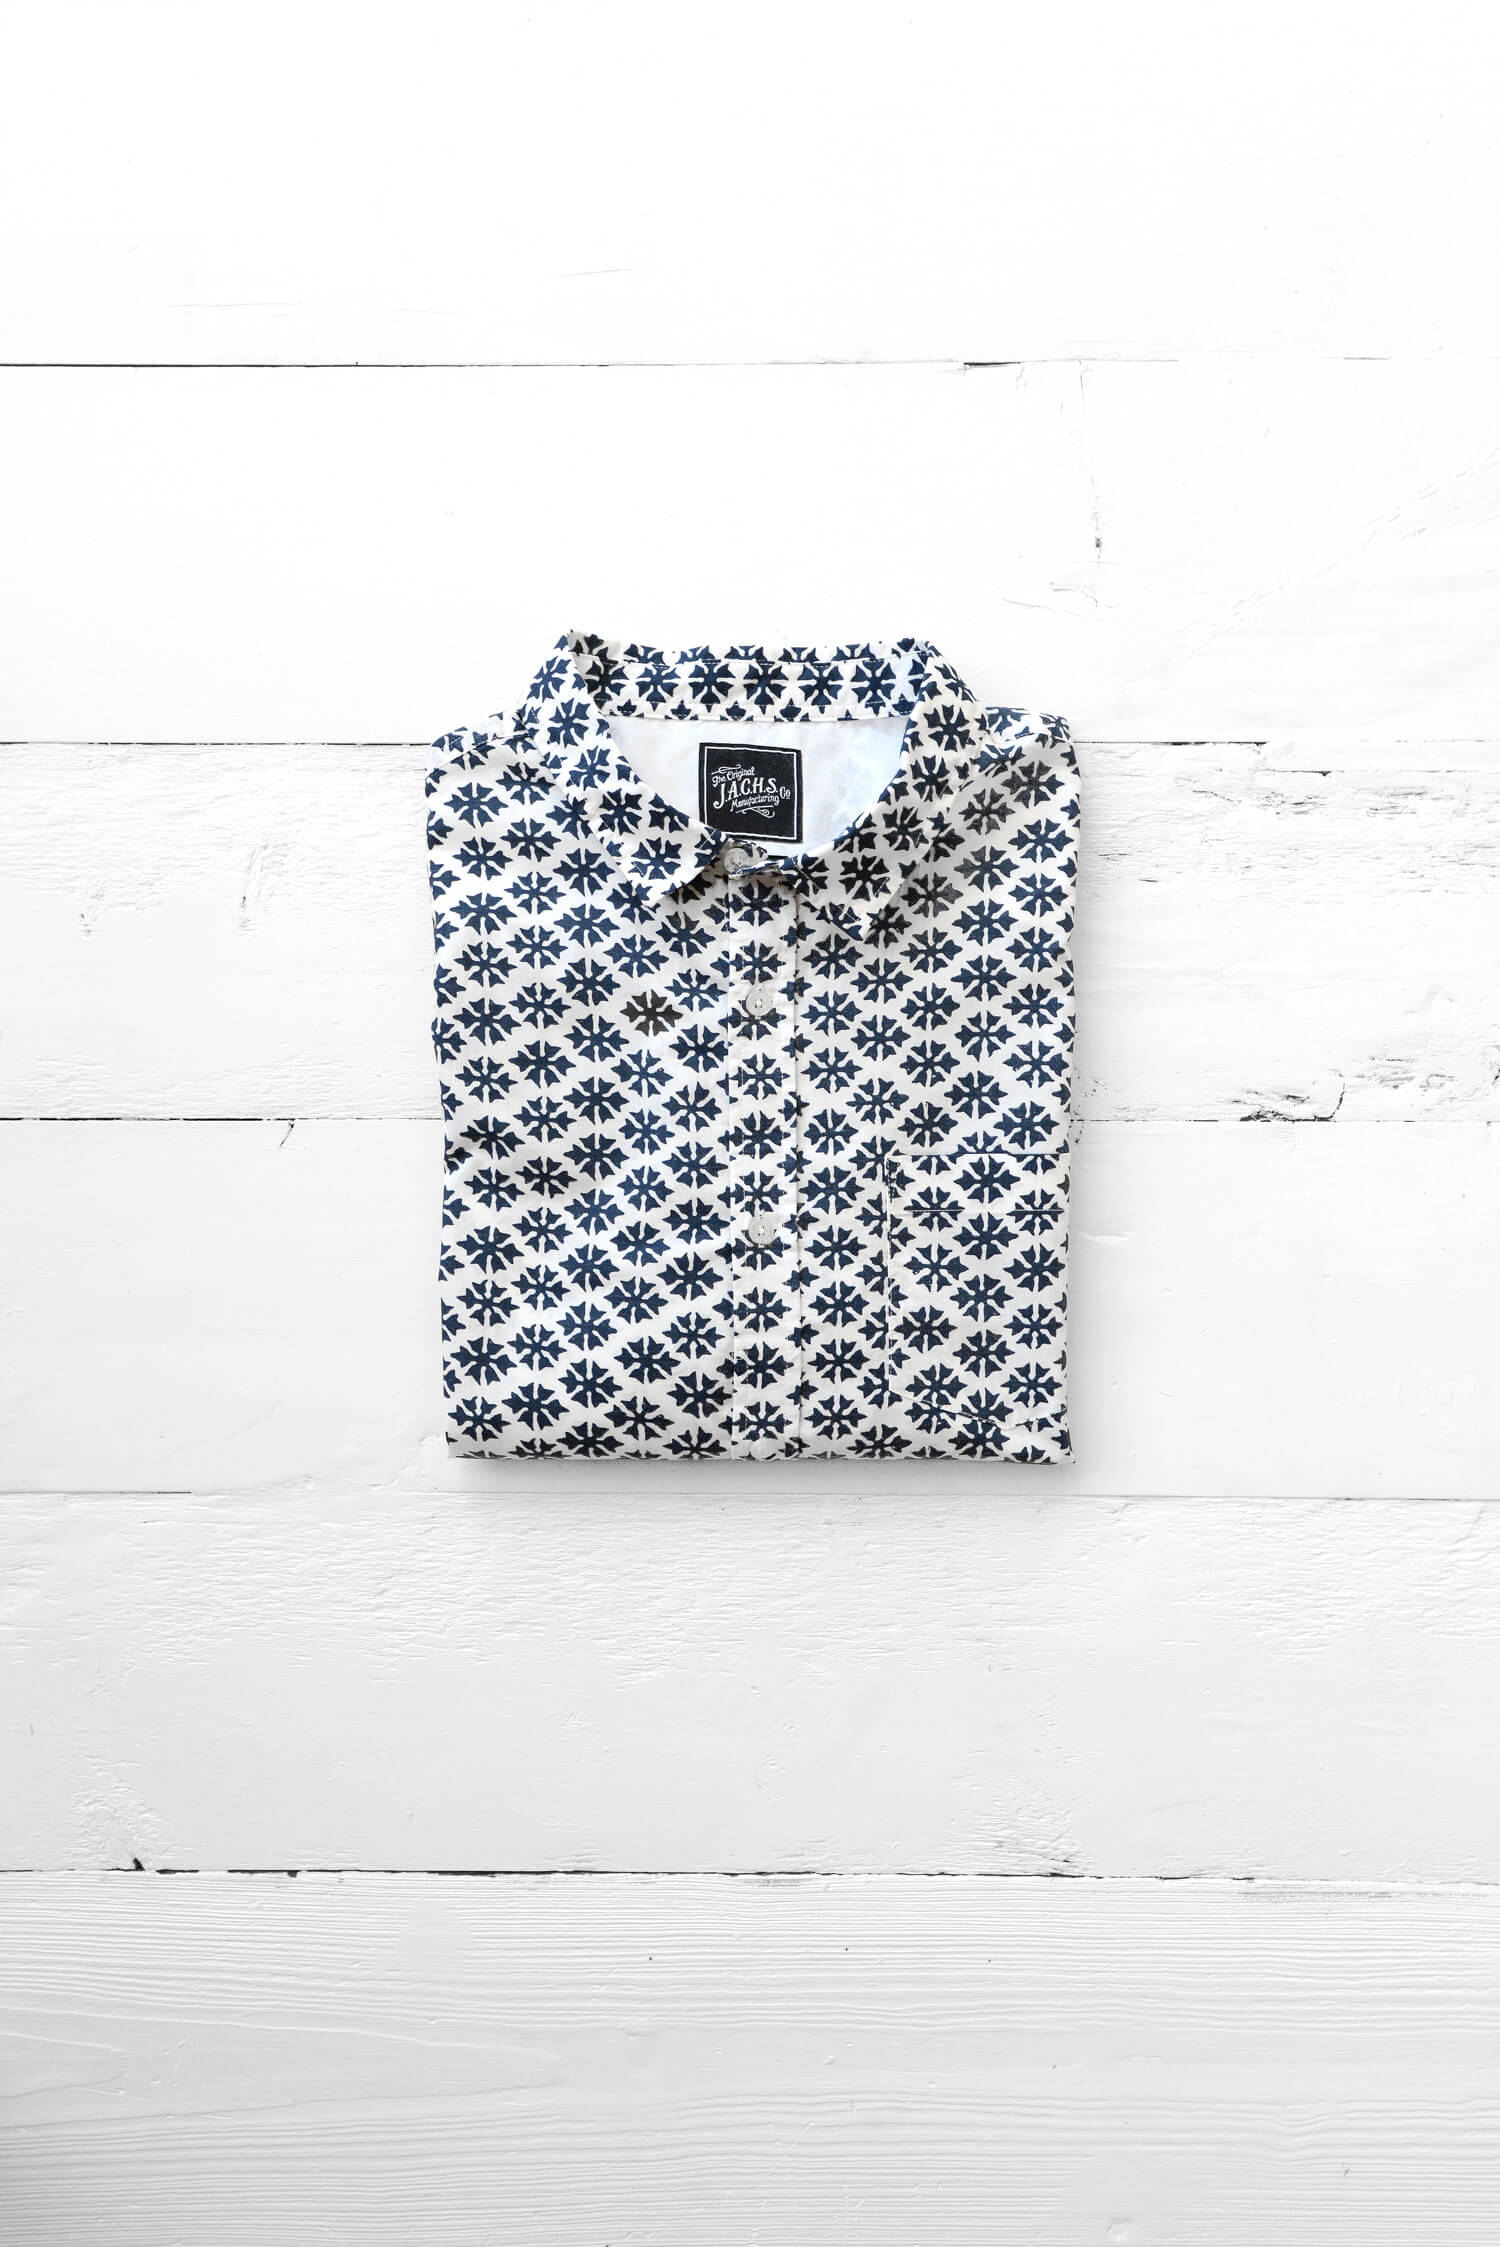 JachsNY Blue and White Printed Shirt (Sold Out)